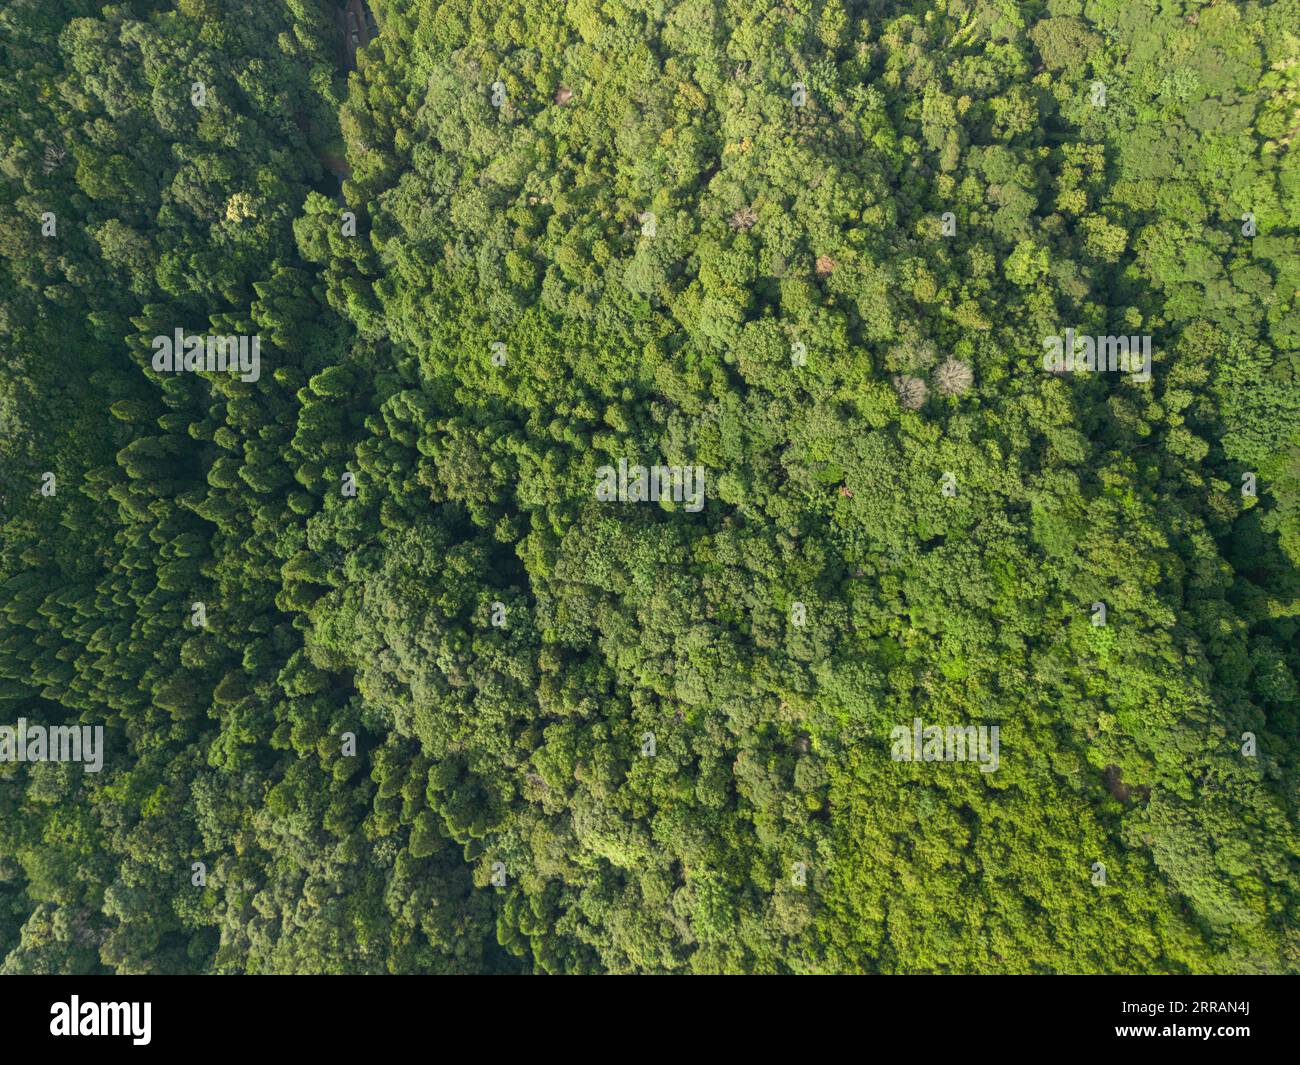 Abstract view of trees from above. Stock Photo